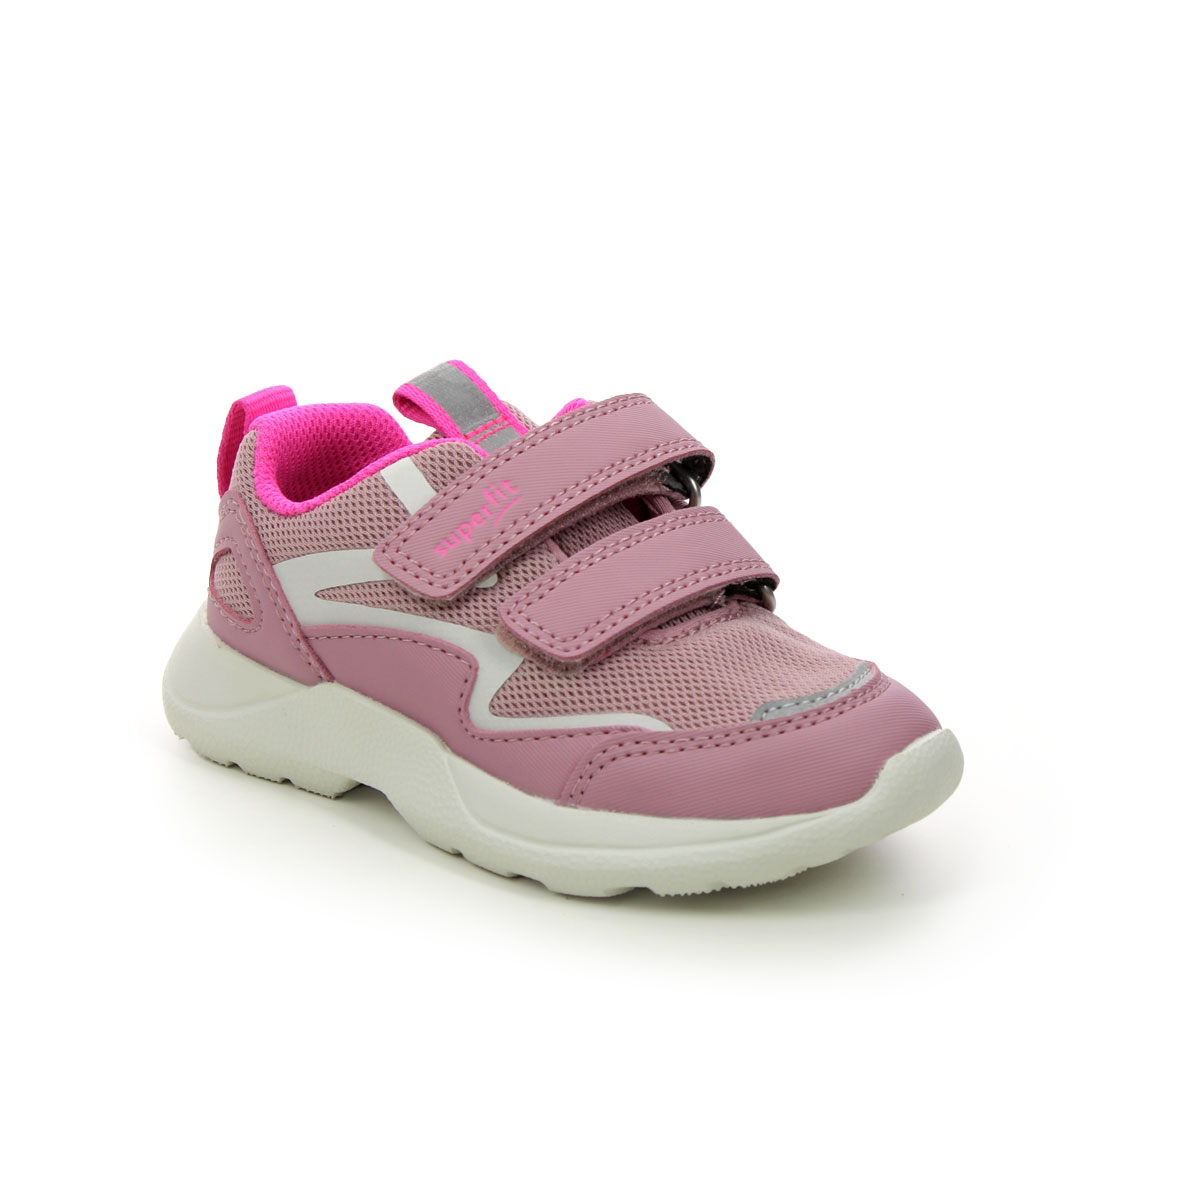 Superfit Rush Mini Pink Kids Girls Trainers 1006206-5510 In Size 21 In Plain Pink For kids